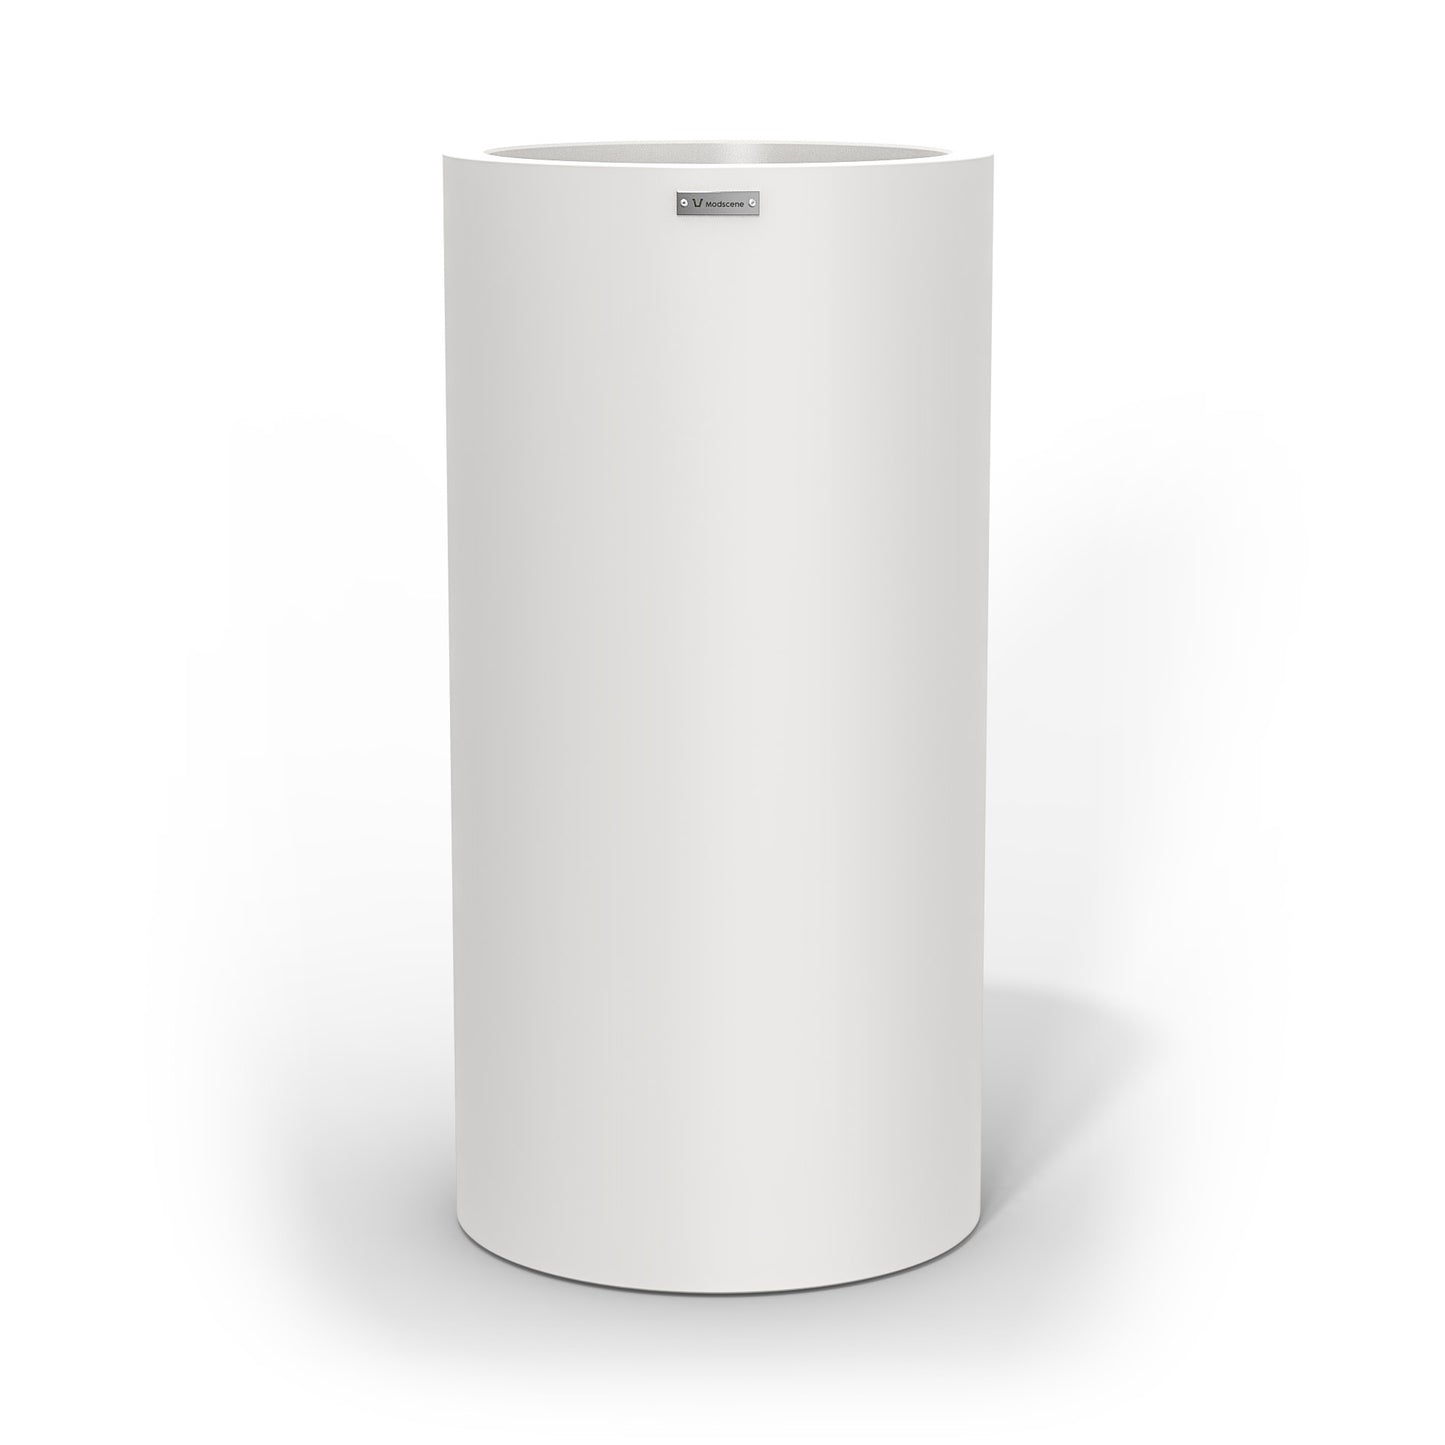 A tall cylinder planter pot in white made by Modscene NZ.